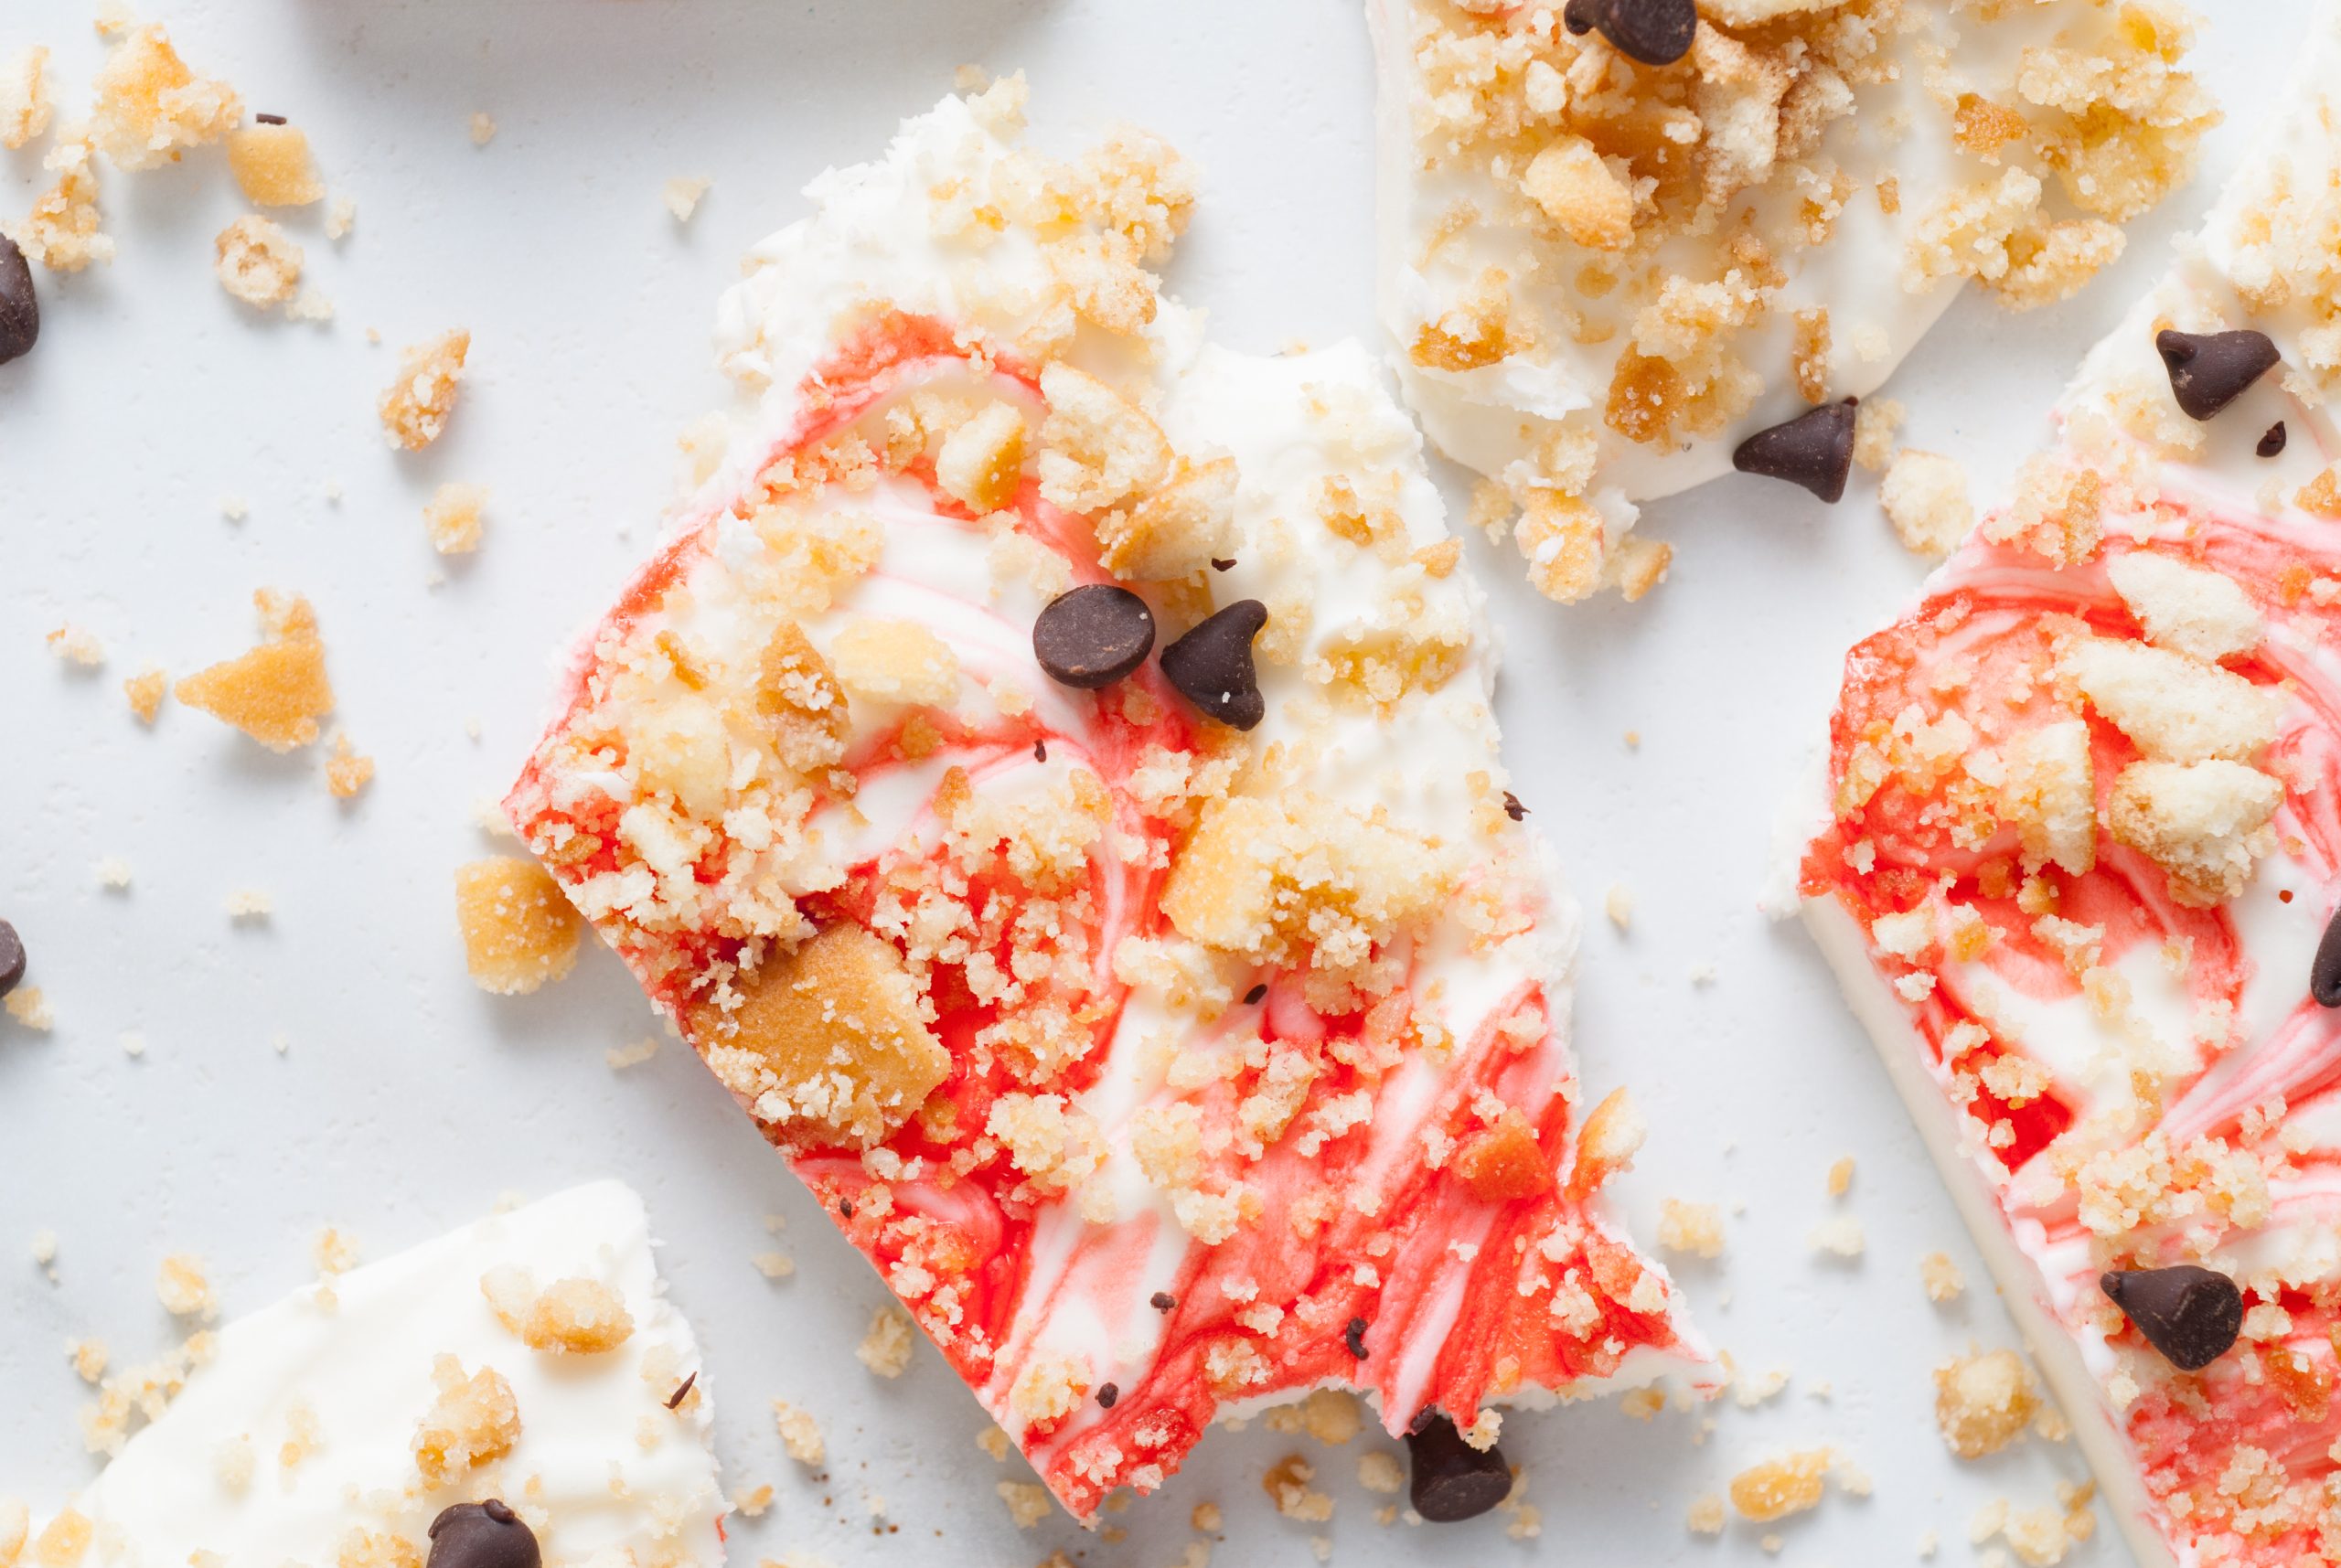 Close-up of broken pieces of white chocolate bark with red swirls, crumbly cookie pieces, and chocolate chips scattered on a white surface.